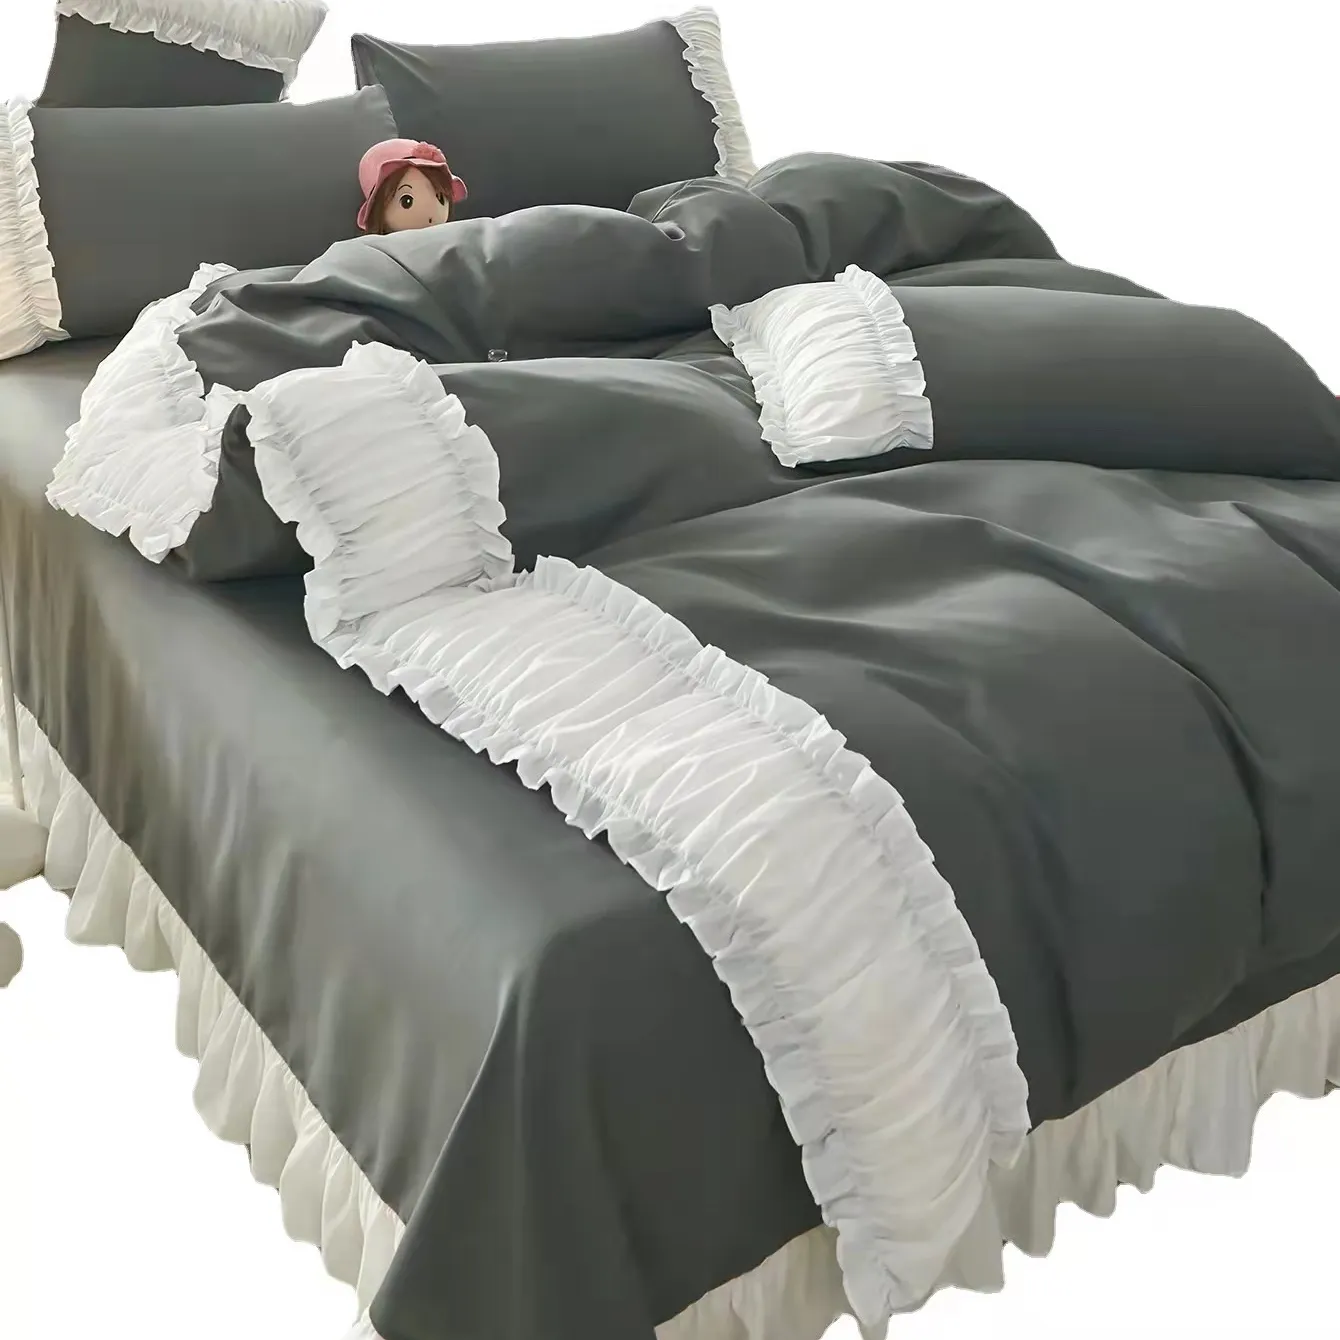 Wholesale UK Size Solid Colour Microfiber Duvet Cover Set with Ruffles including Pillow Cases